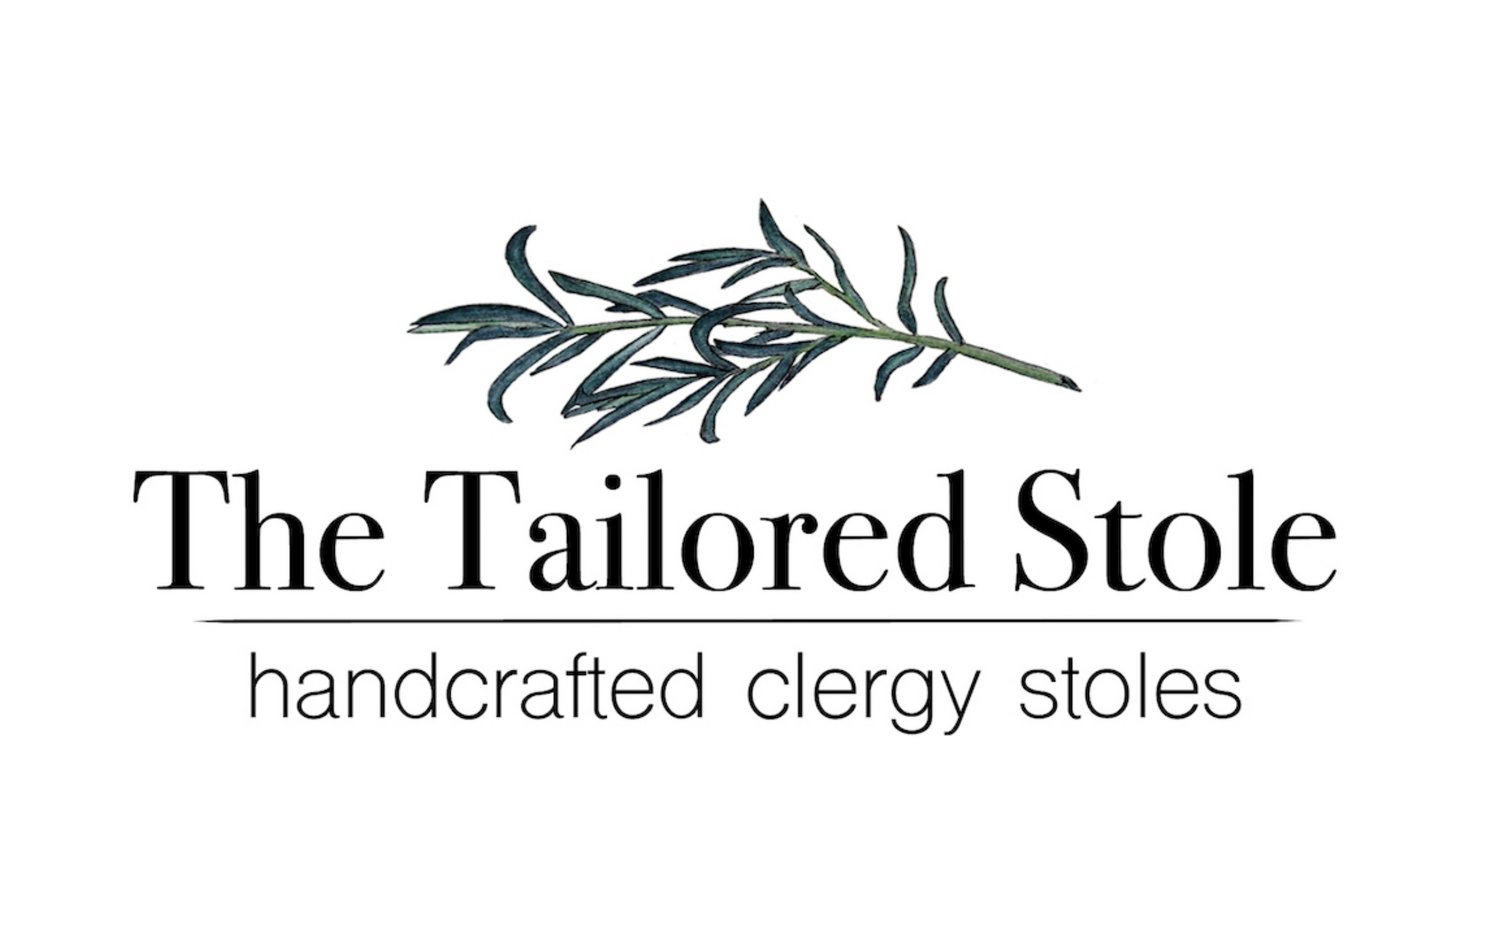 The Tailored Stole